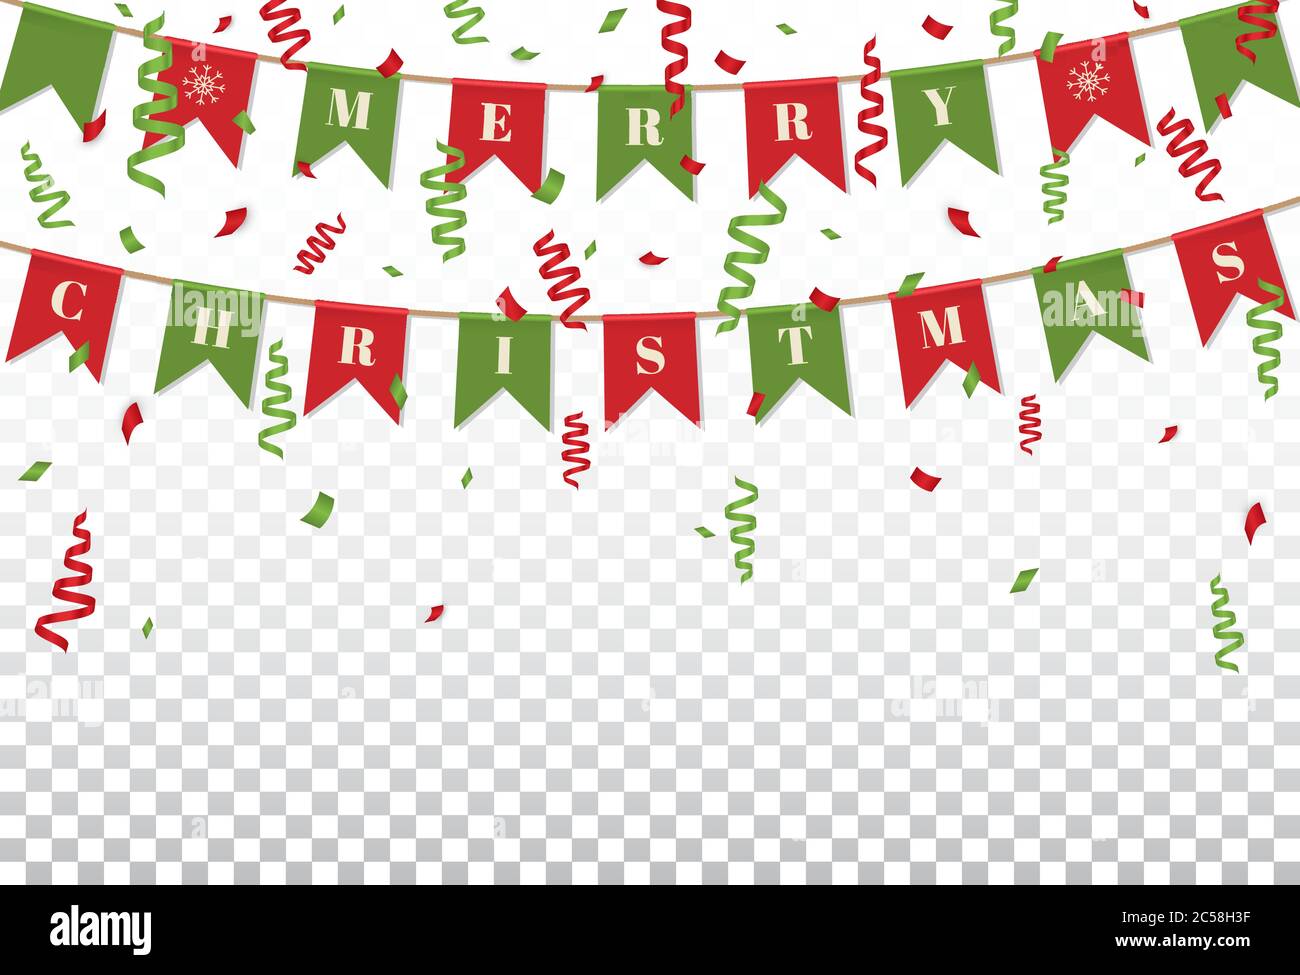 Merry Christmas background with xmas bunting flags and confetti in traditional colors. Bright Christmas garlands. Winter holiday design. Vector Stock Vector